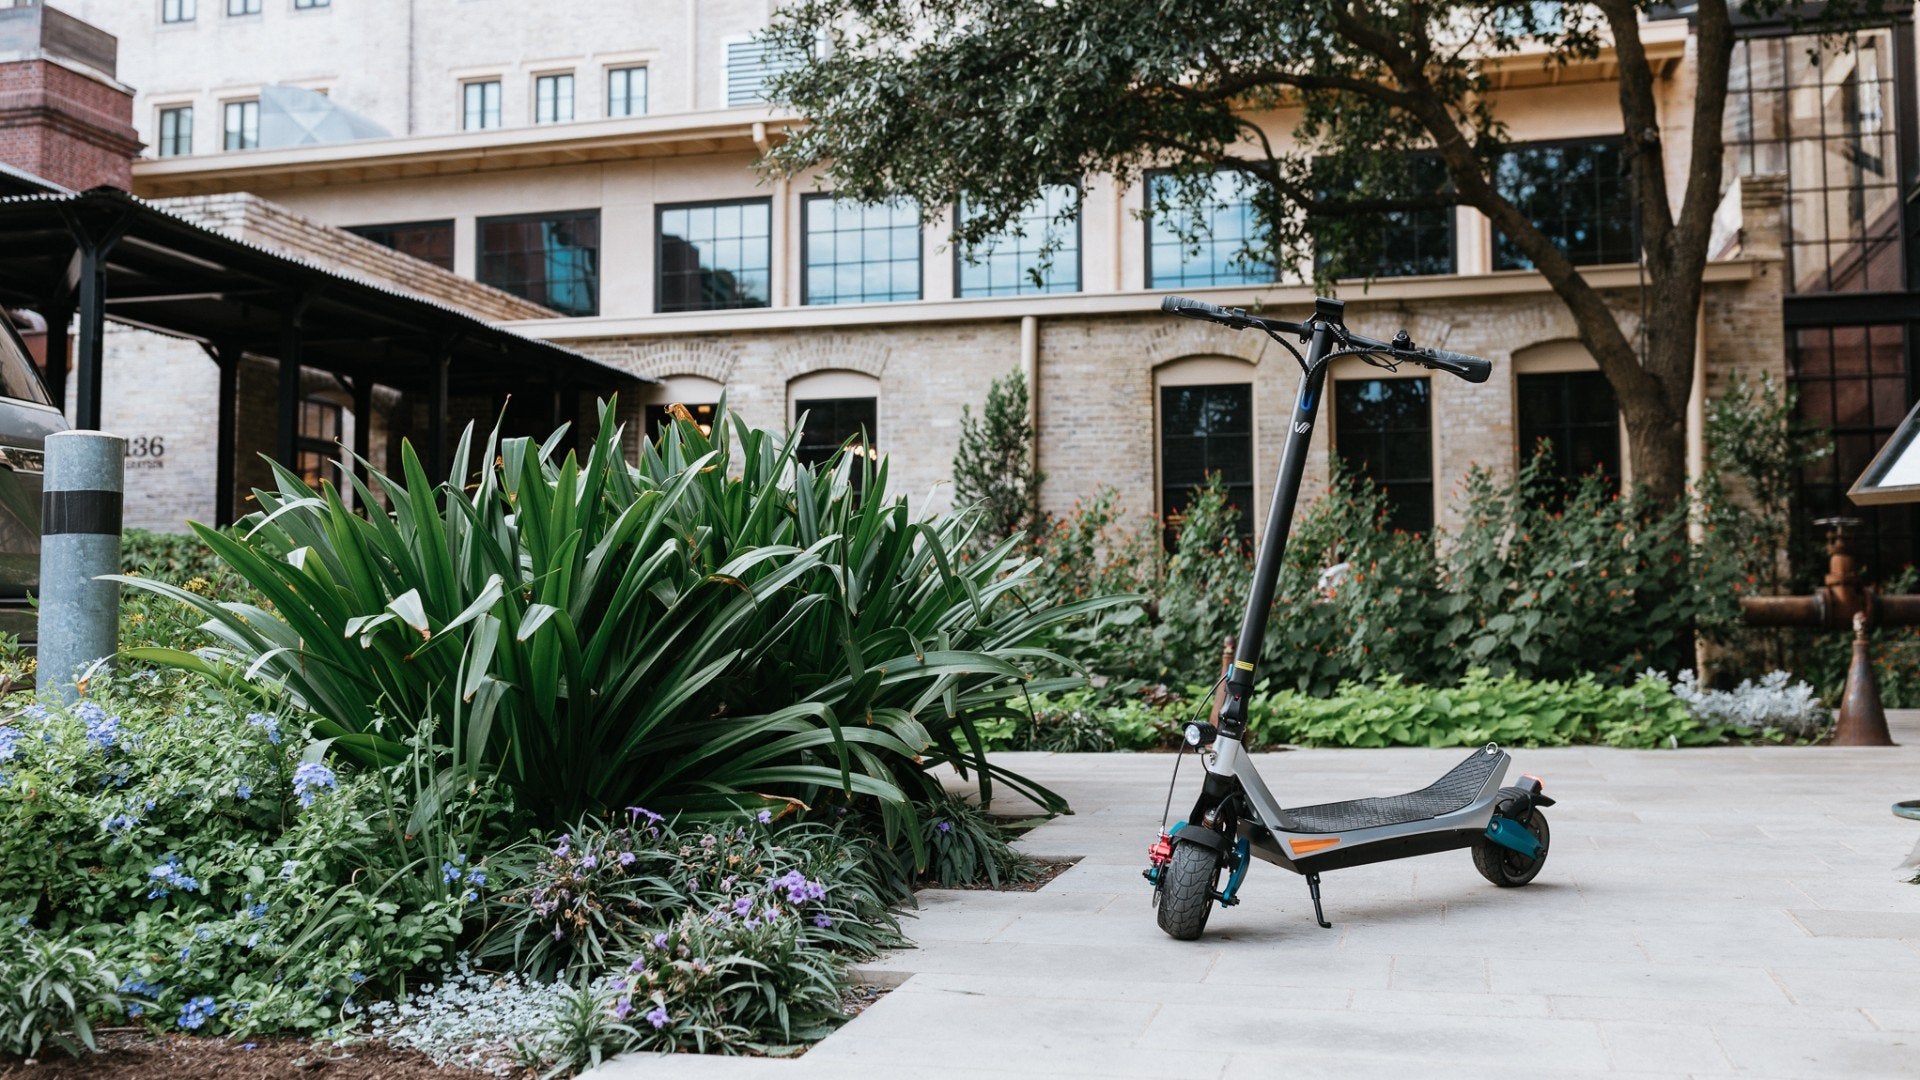 Why should you consider buying an electric scooter?